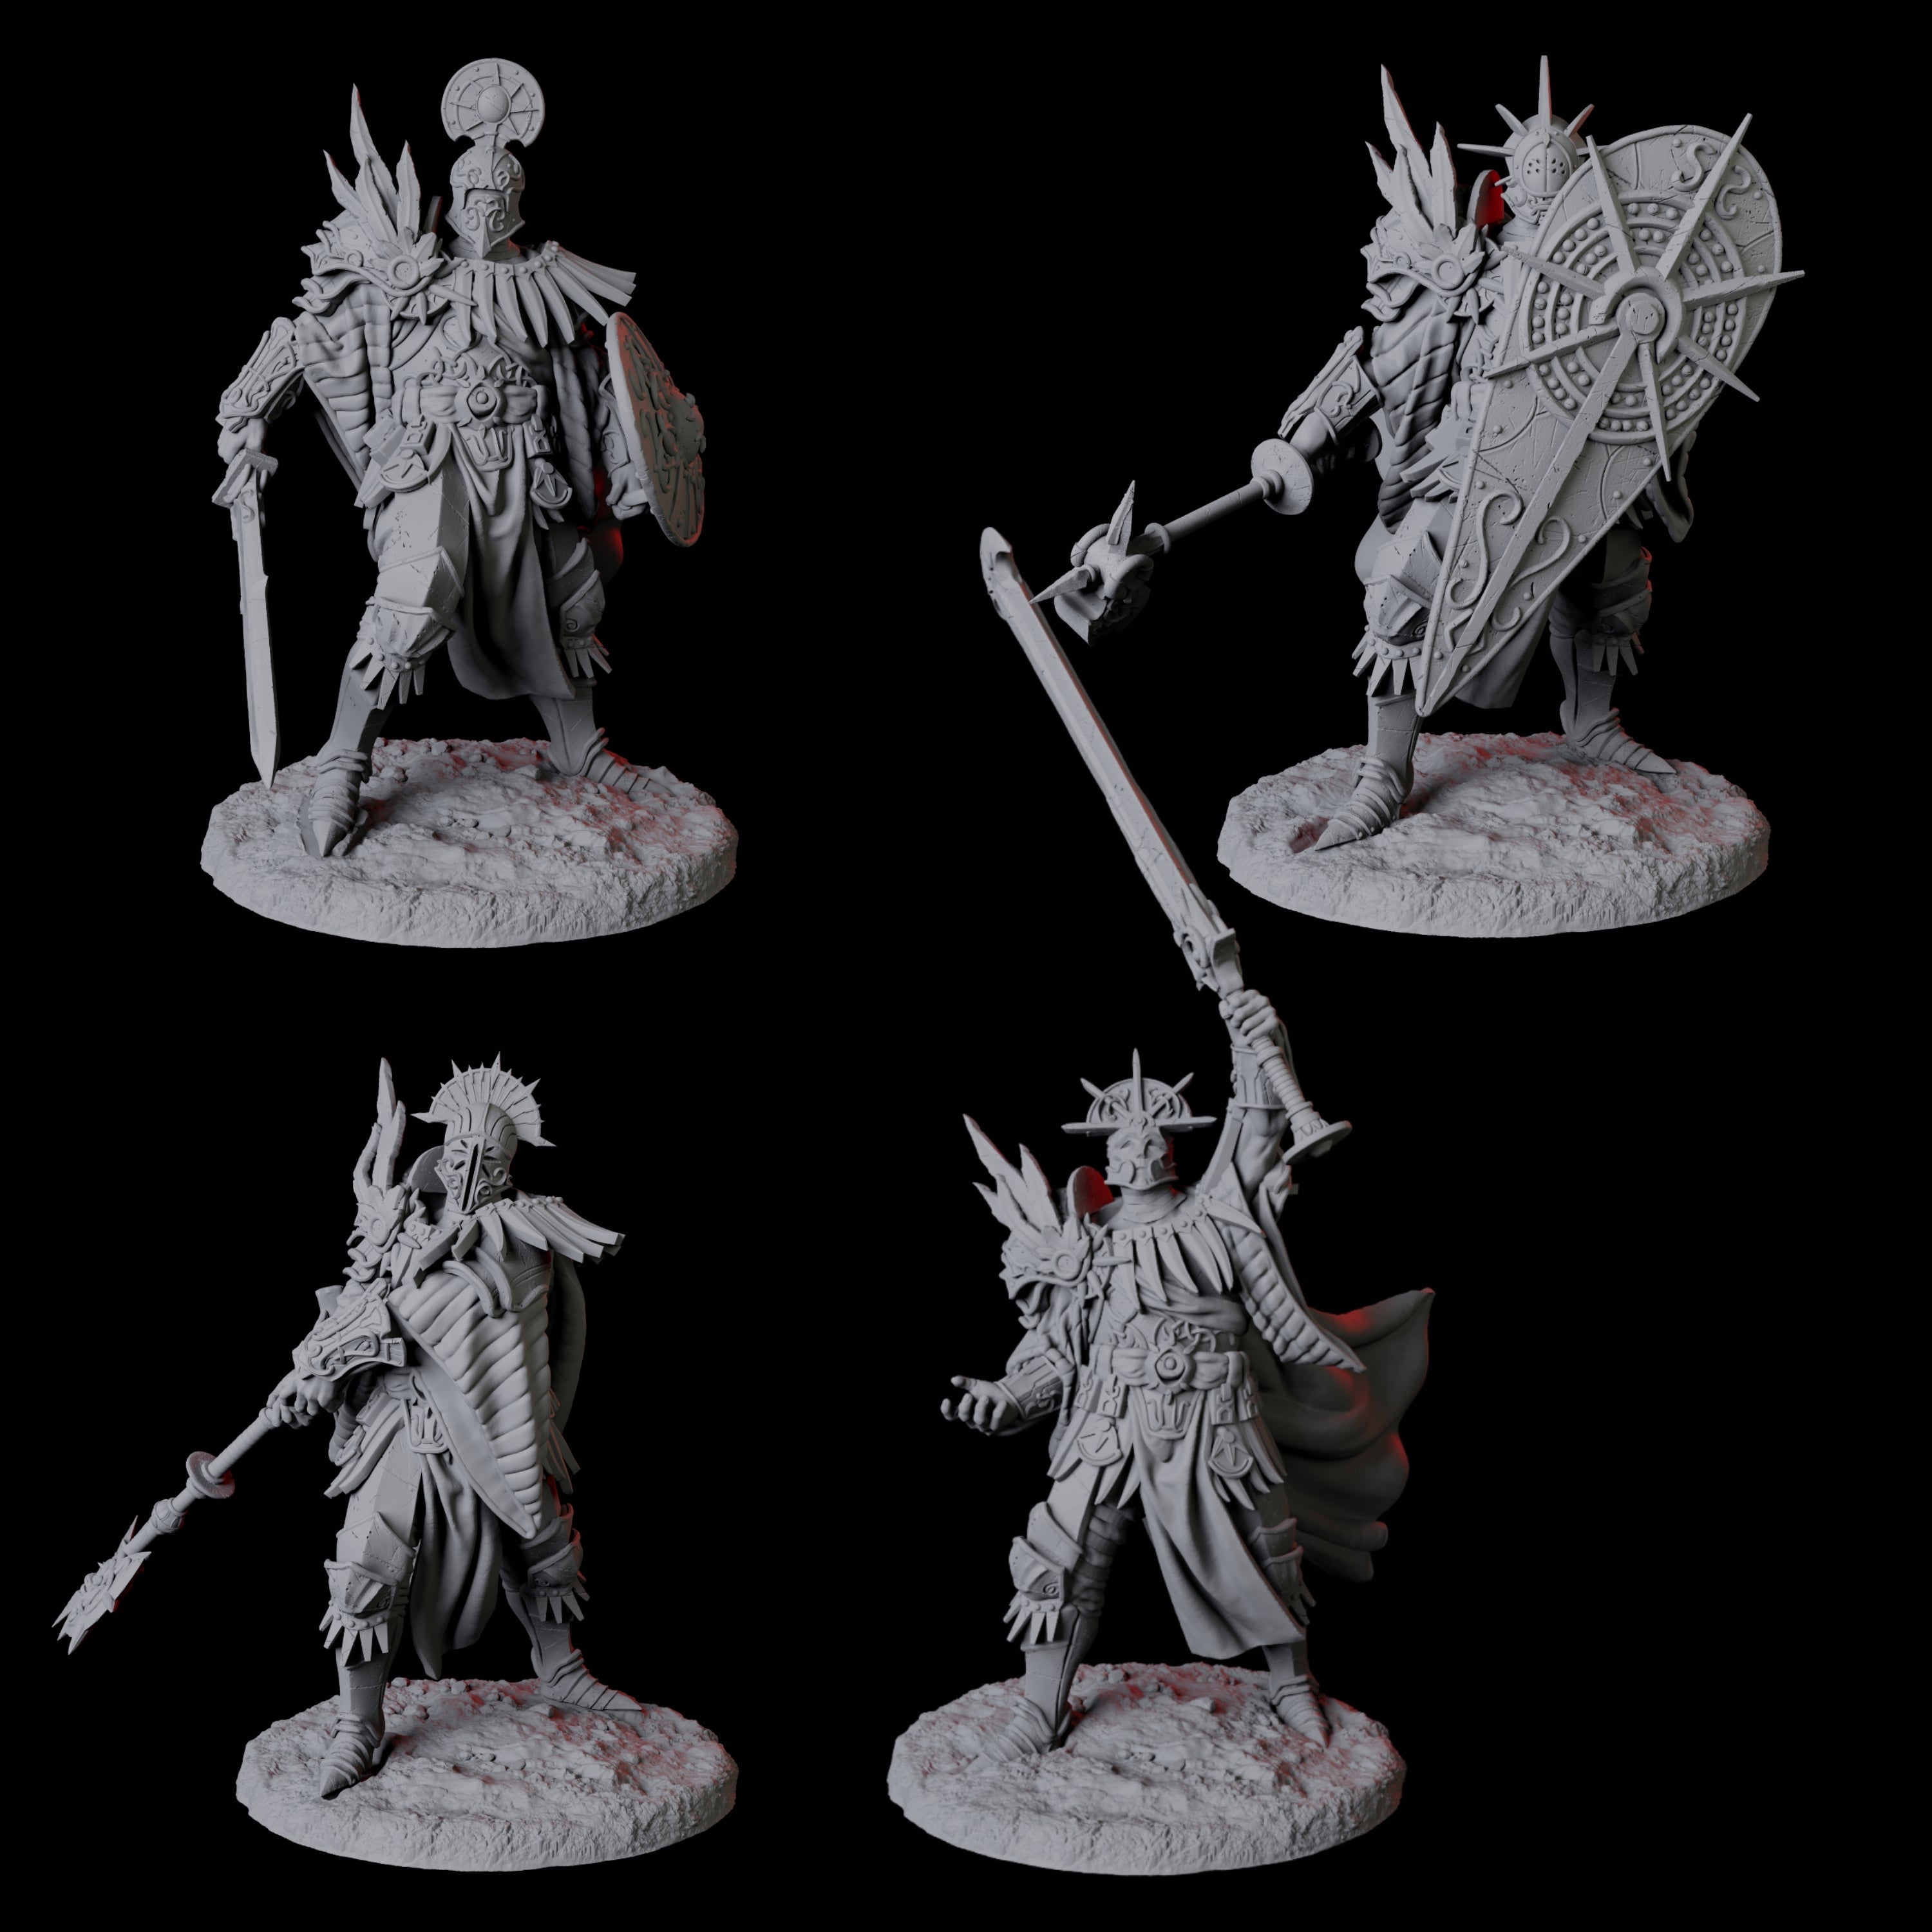 Four Powerful Legion Archons Miniature for Dungeons and Dragons, Pathfinder or other TTRPGs